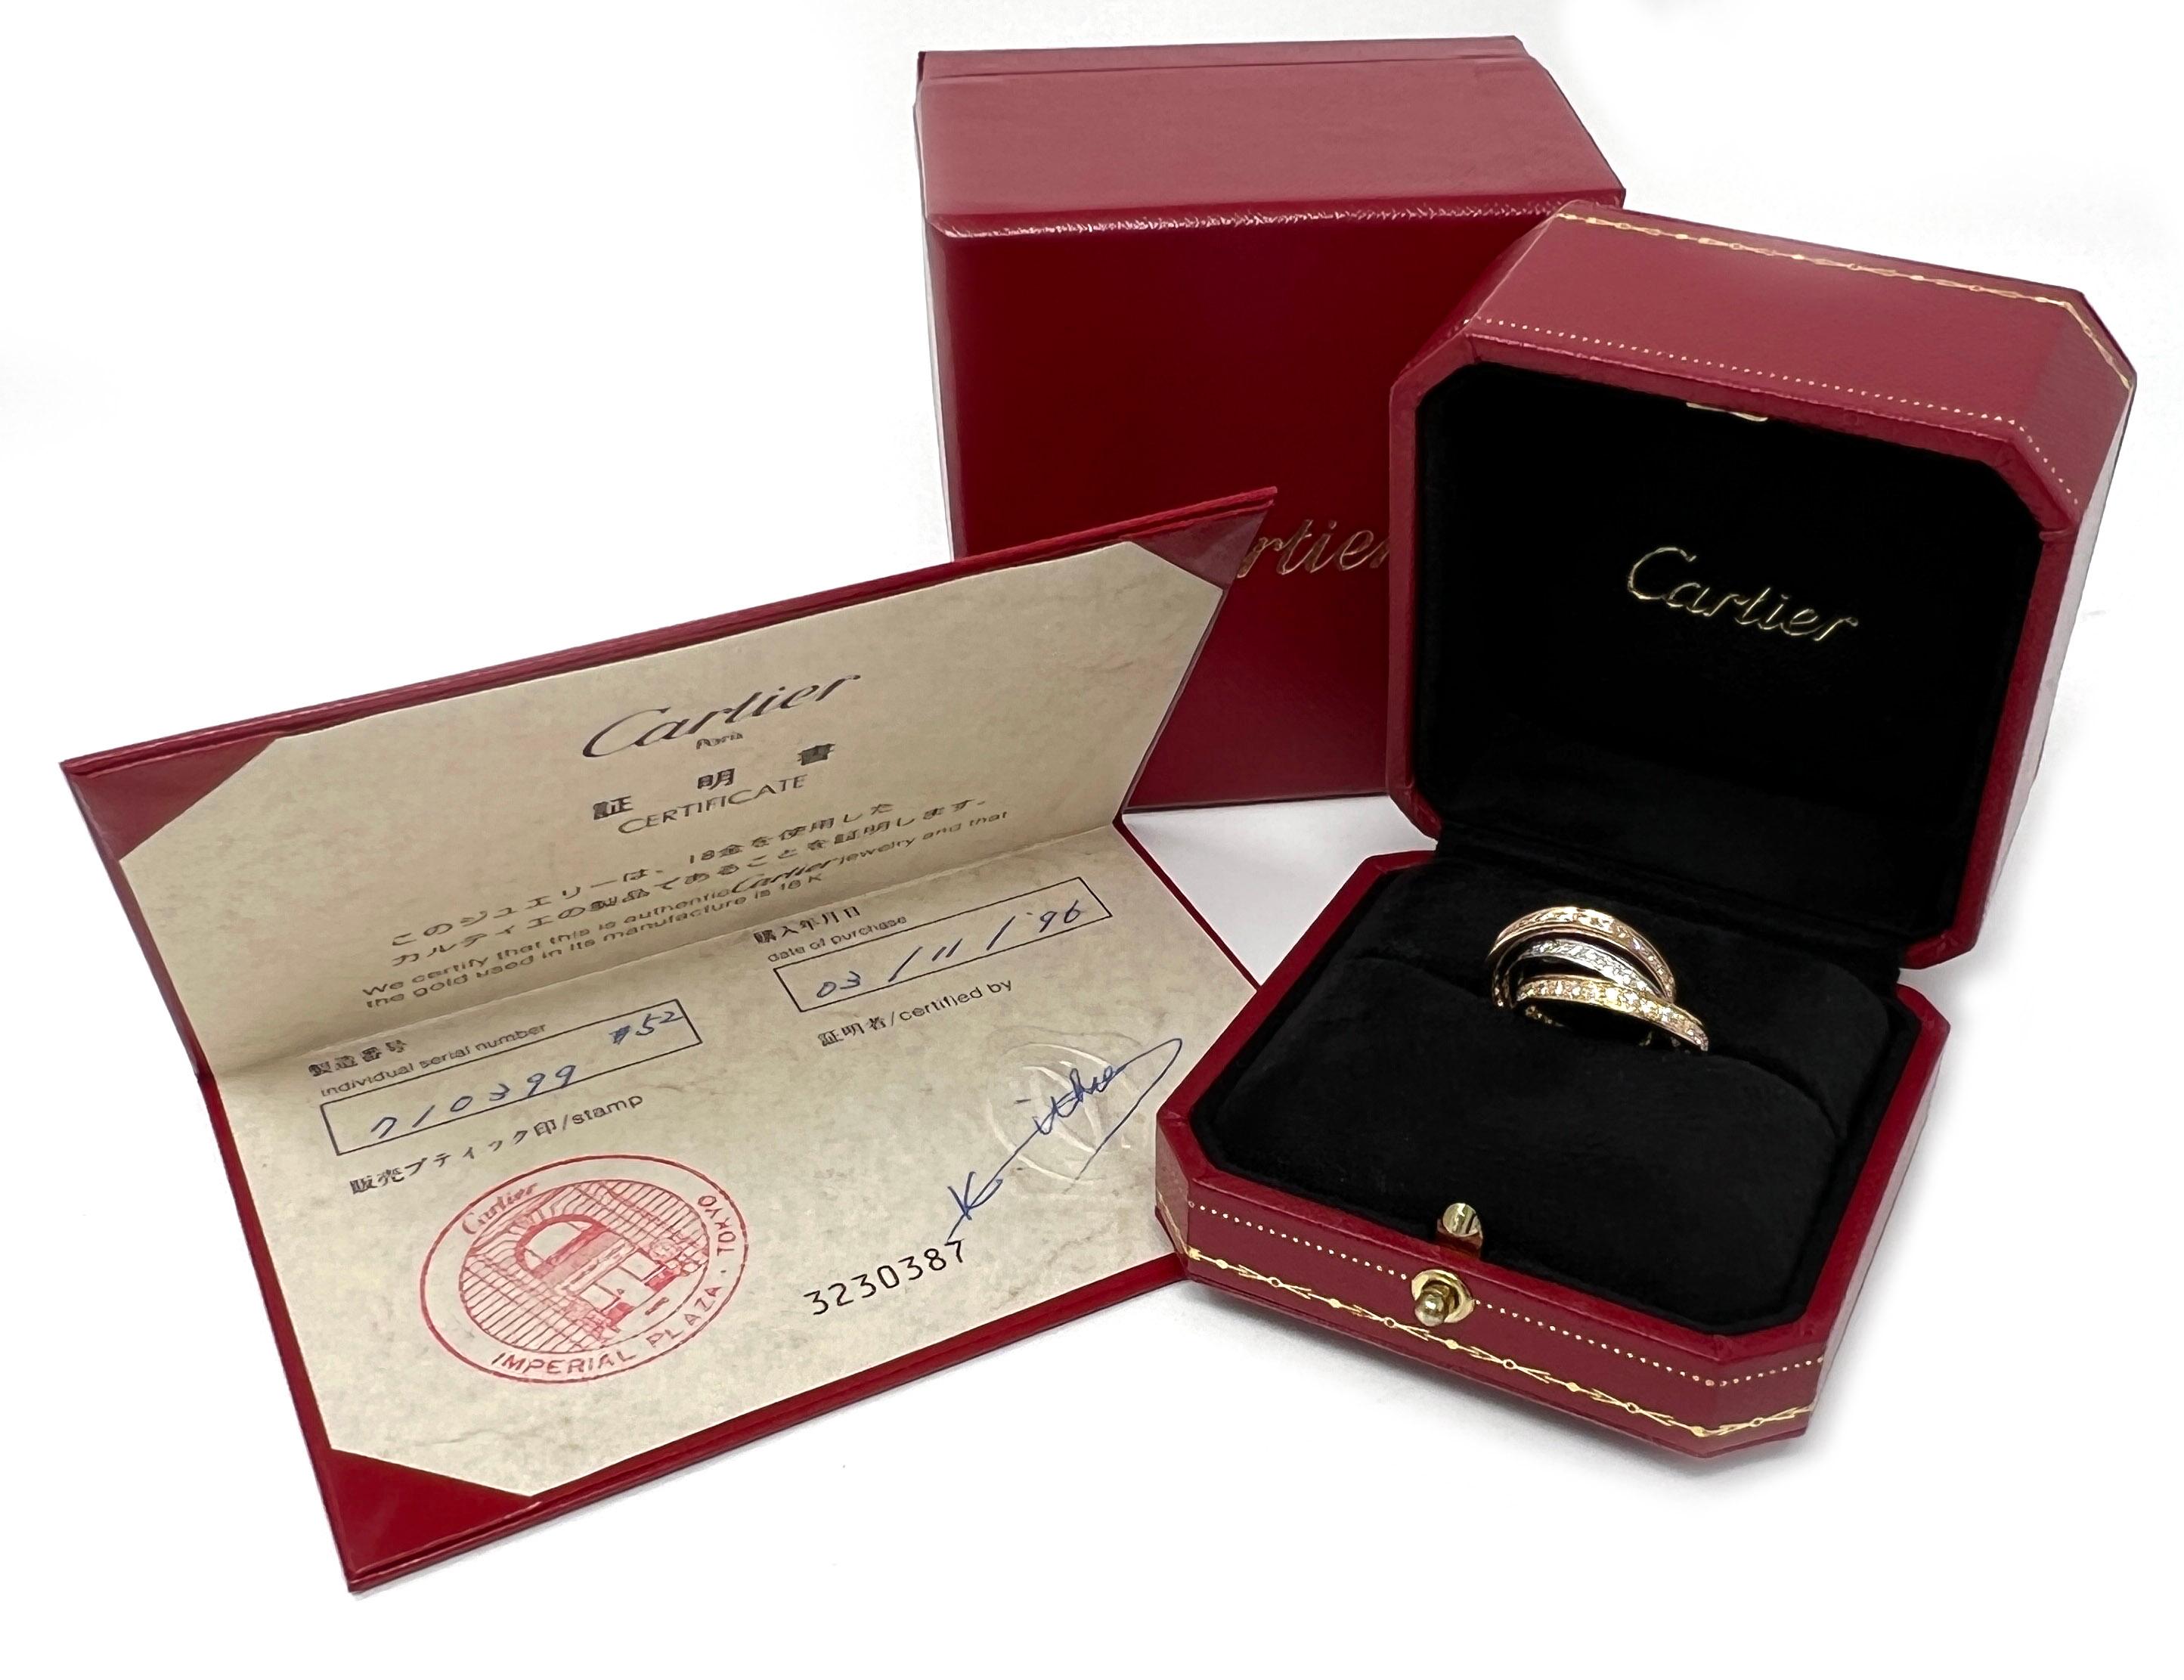 This is an elite authentic band ring by Cartier from the Trinity collection. It is crafted from 18k yellow, white and rose gold with a polished finish featuring a triple interlaced band with the three color gold, each set with a full circle of